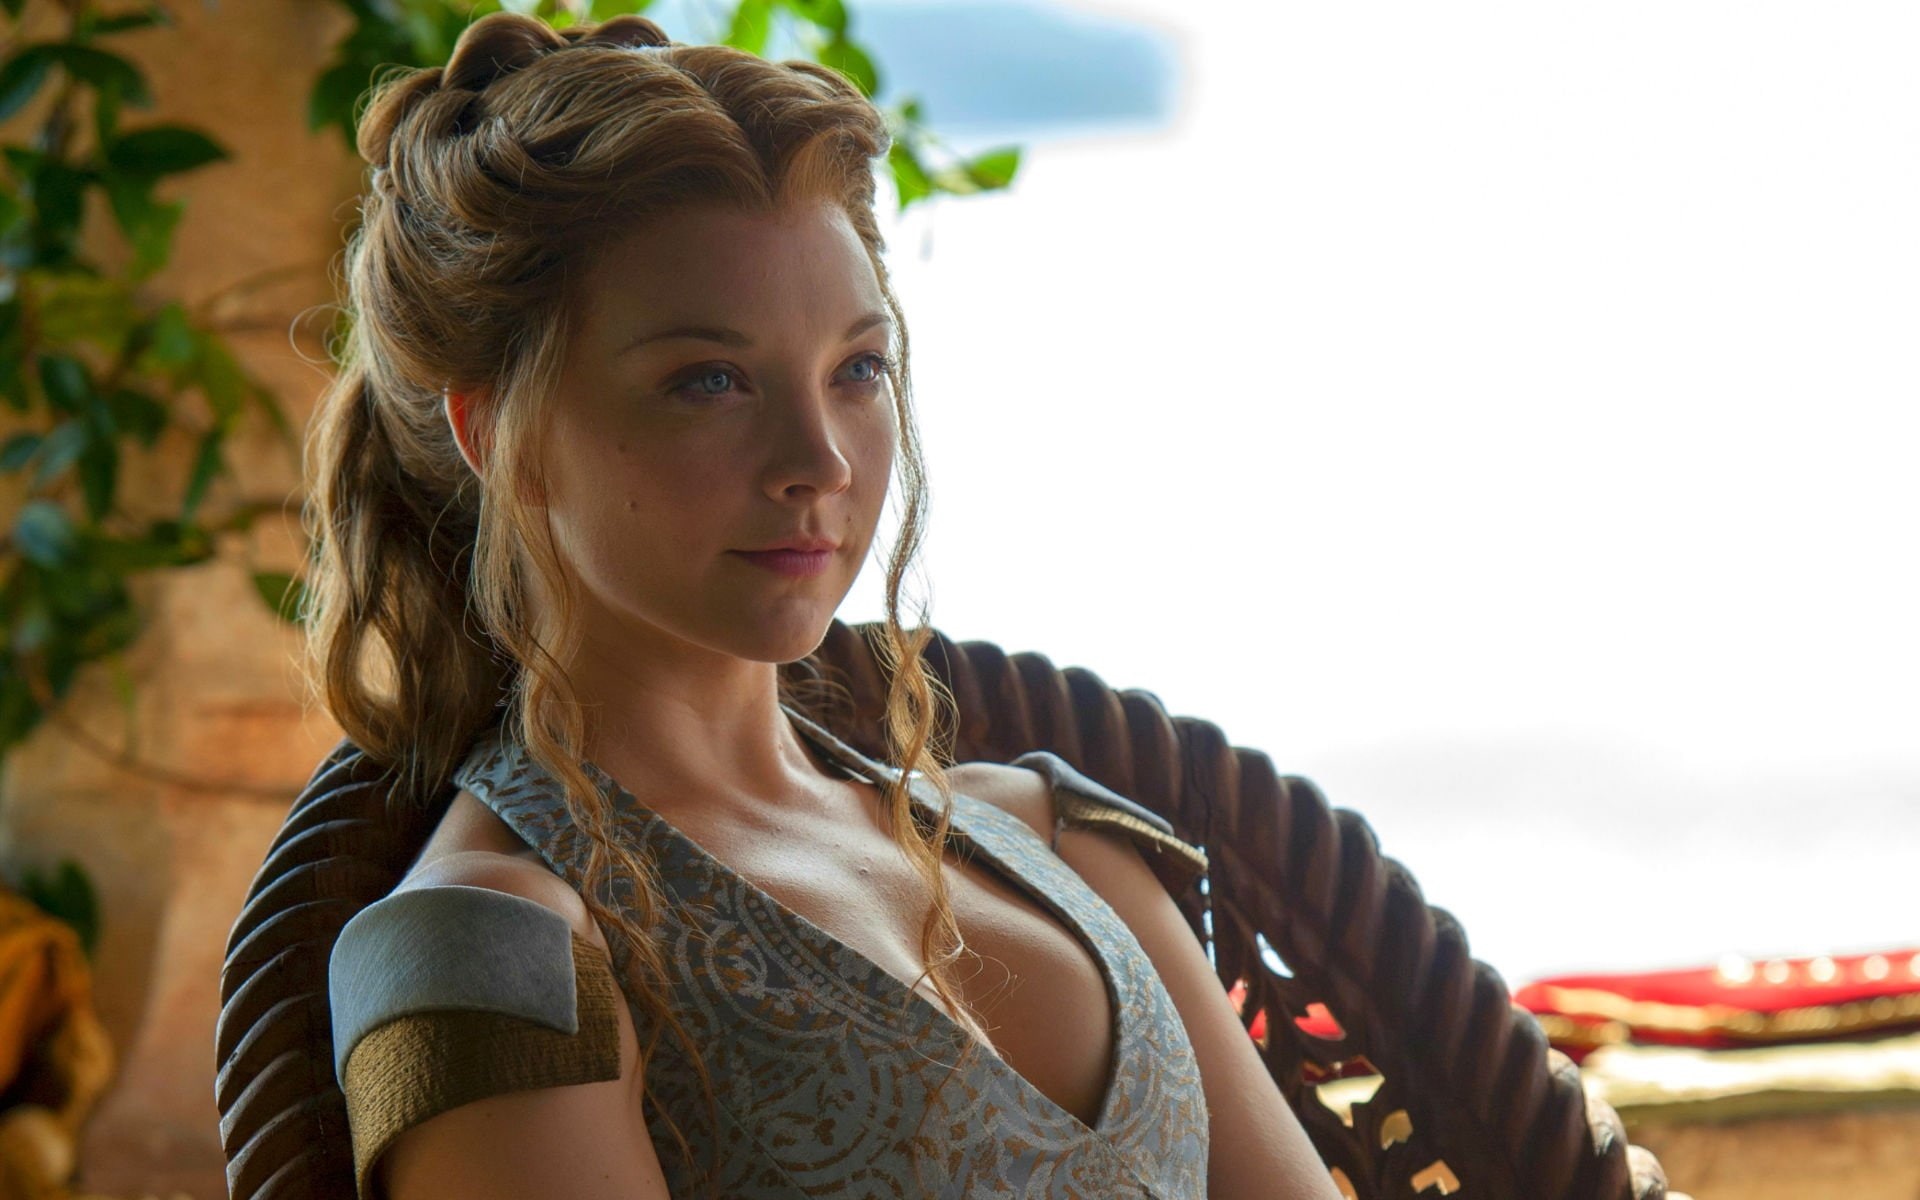 People 1920x1200 Natalie Dormer  Margaery Tyrell Game of Thrones women blonde blue eyes dress blue dress cleavage curly hair TV actress sitting on chair sitting chair